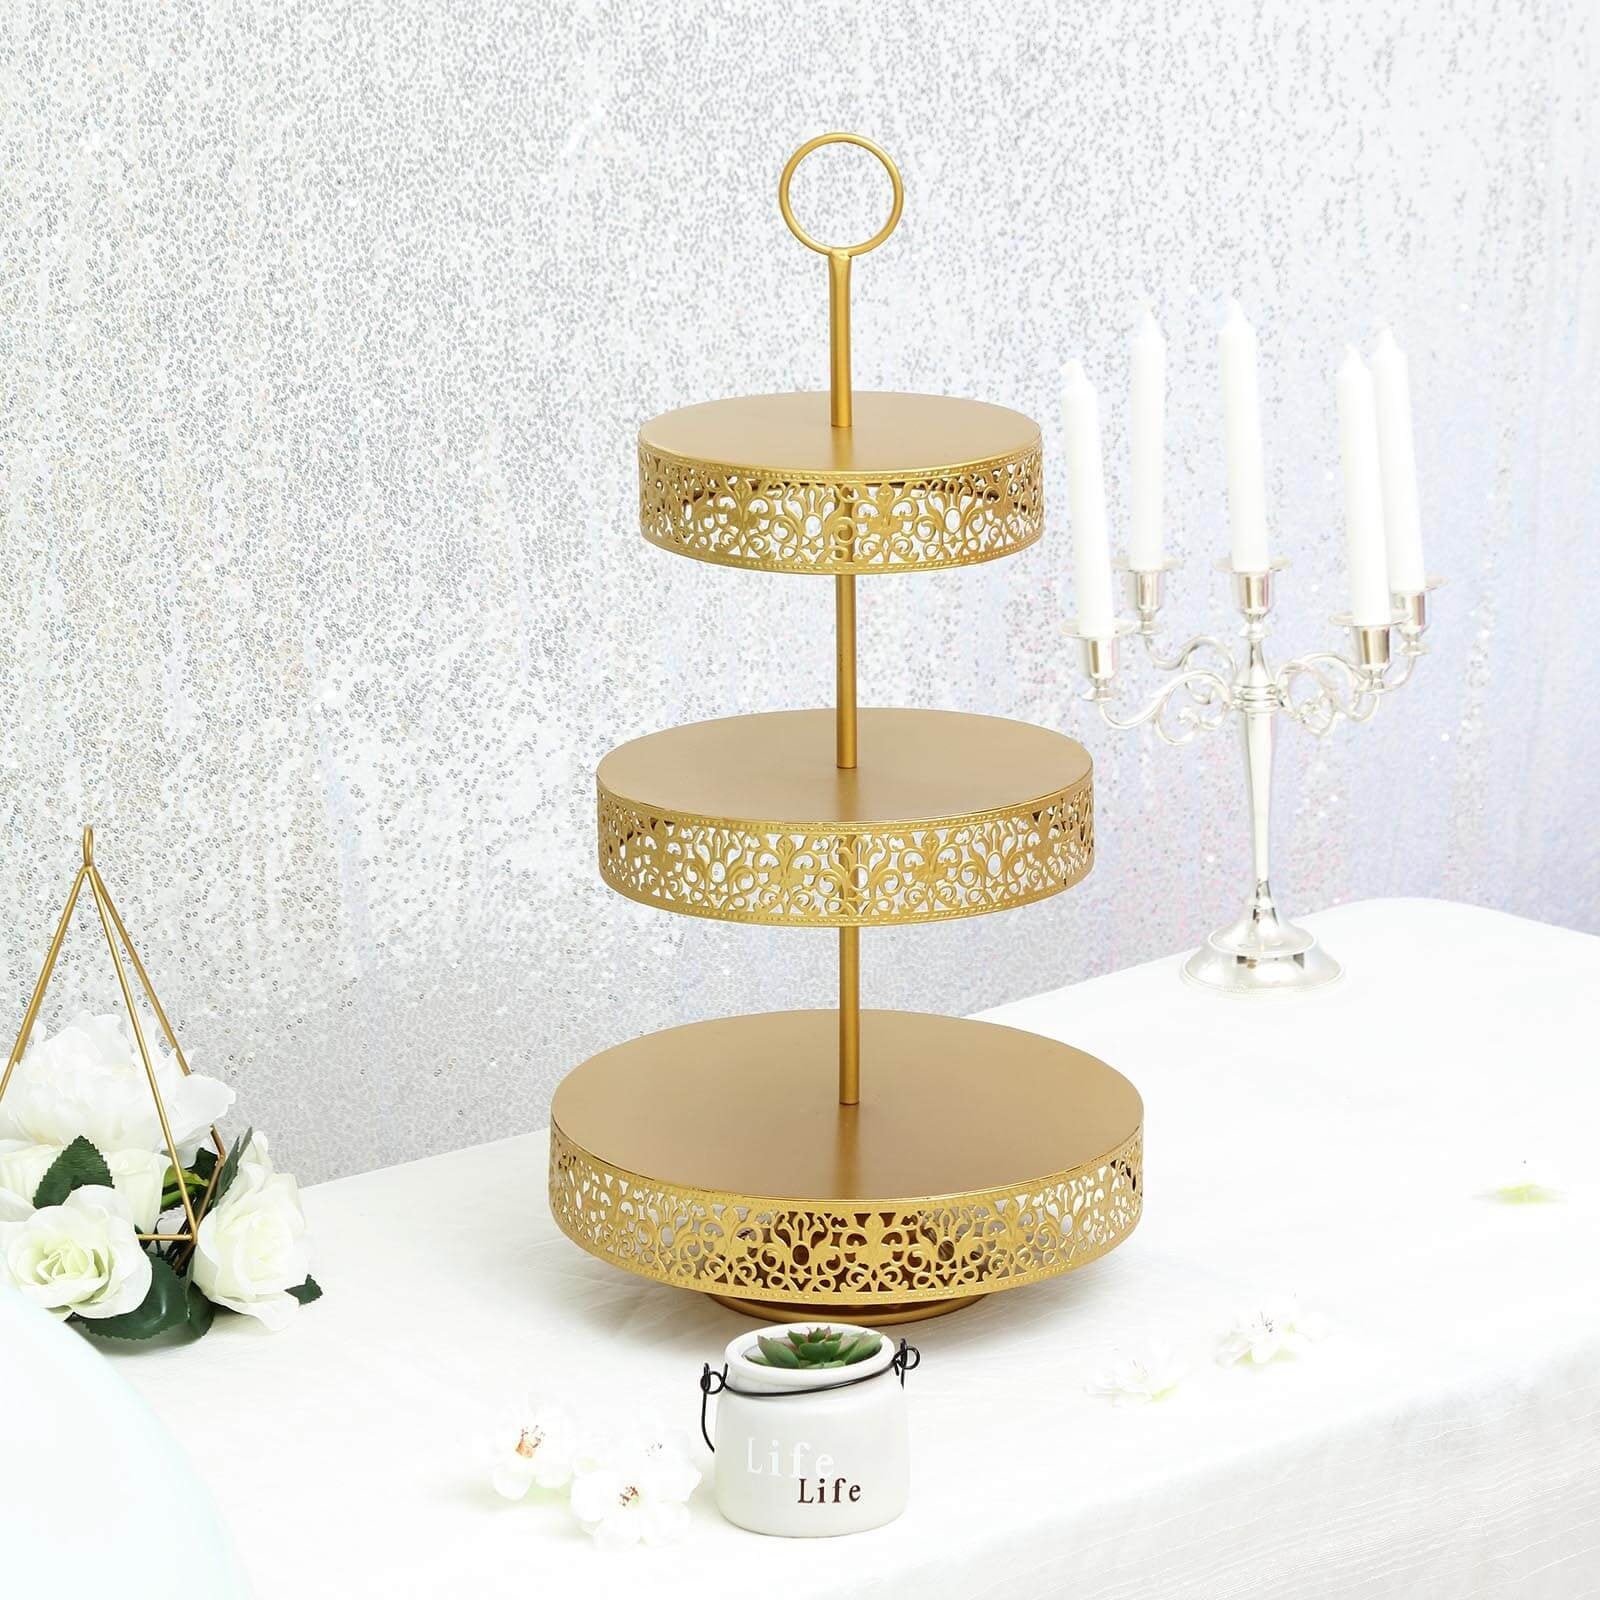 Stainless Steel Gold Cupcake Stand-Gold Dessert Stand-Gold Cake Stand-3 Tiered Cake Stand for Wedding